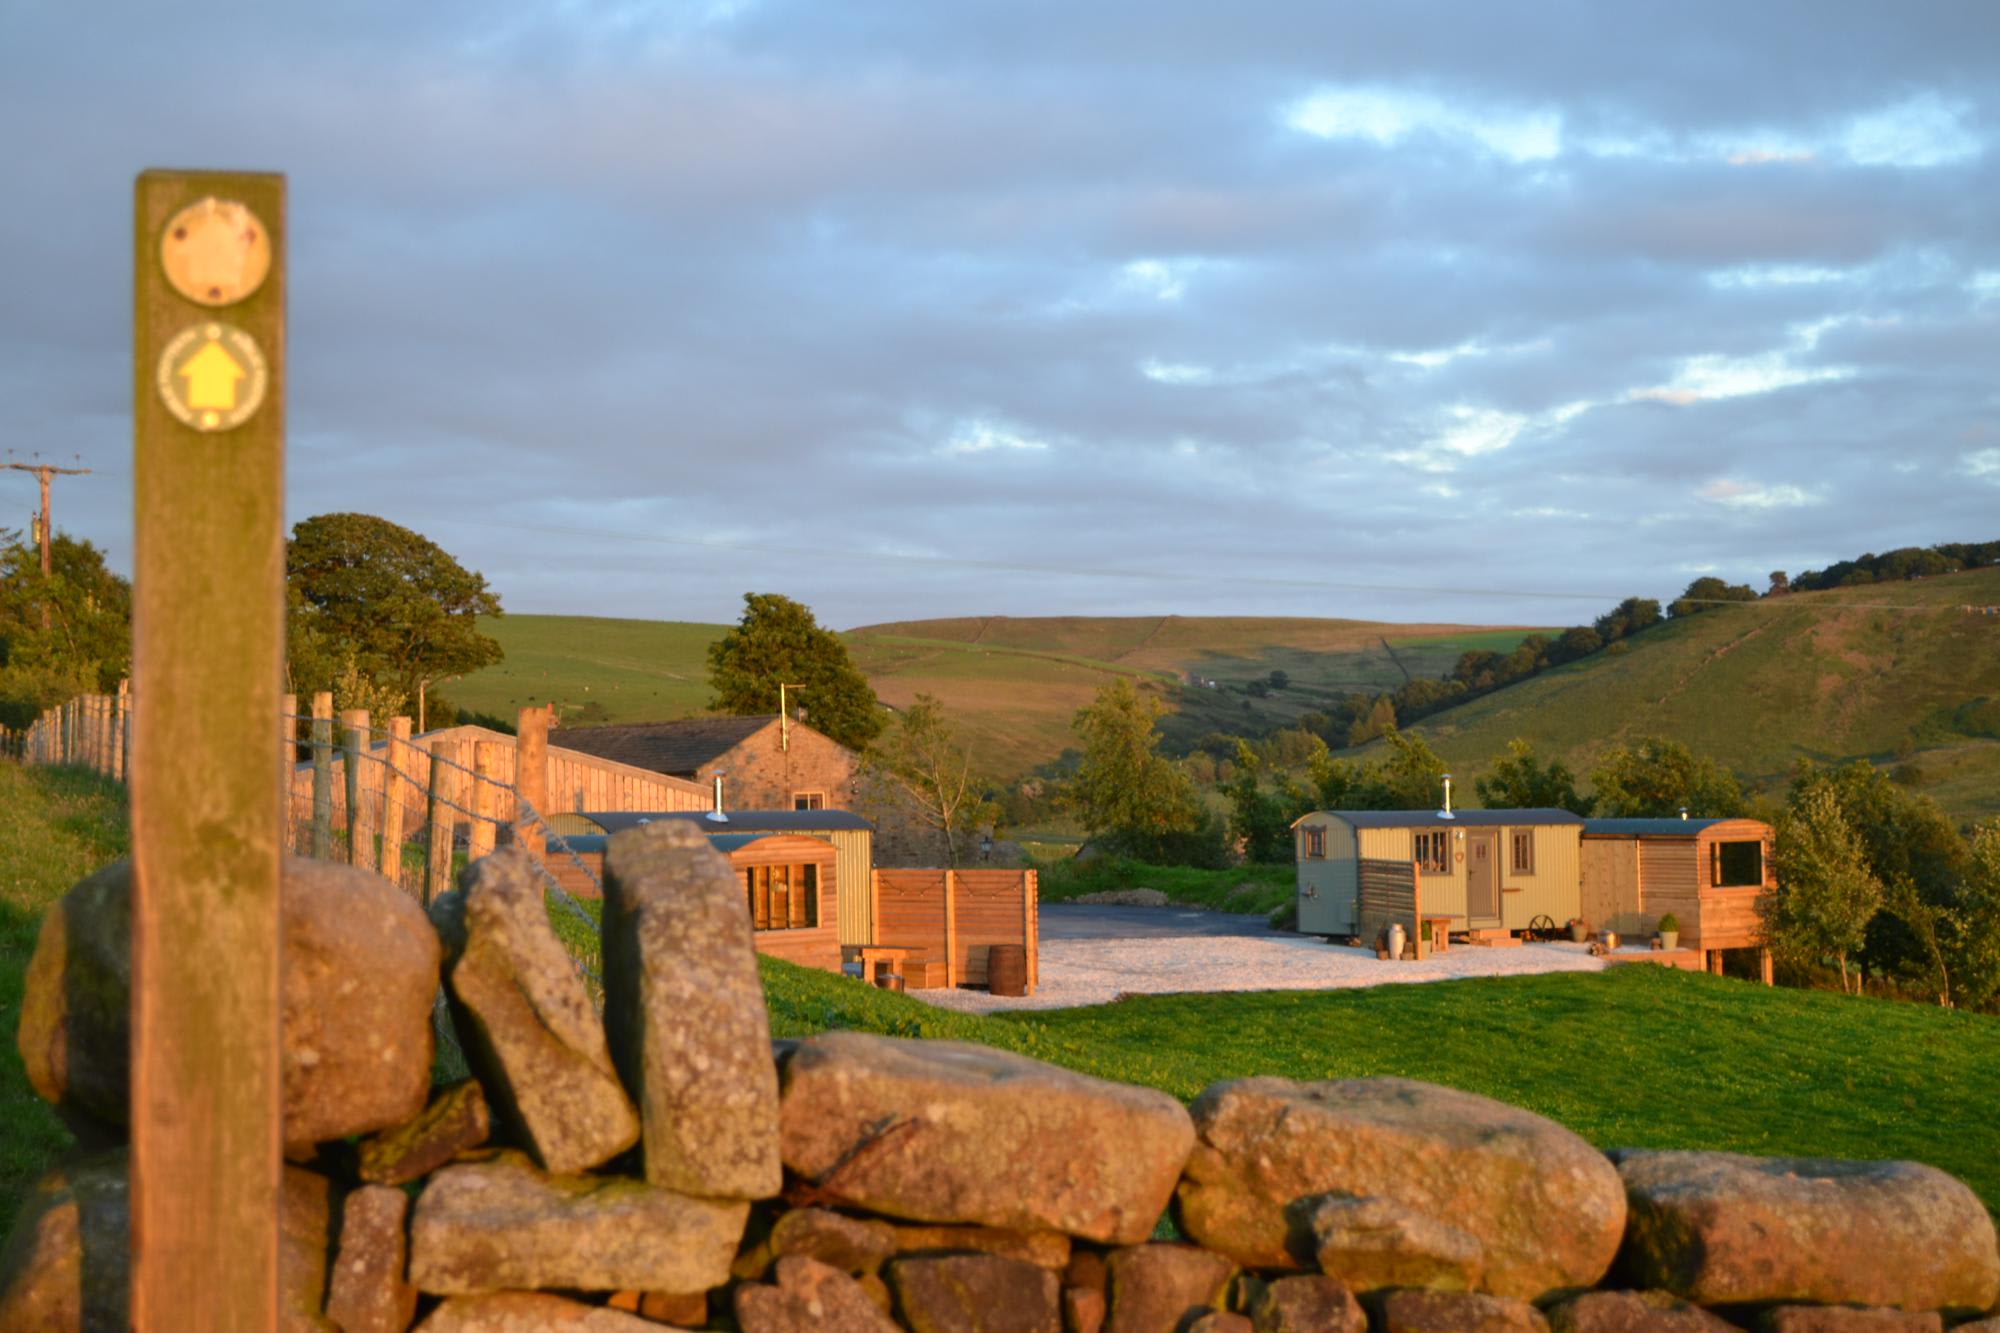 Copy House Farm is situated right next to the 45-mile-long Pendle Way.